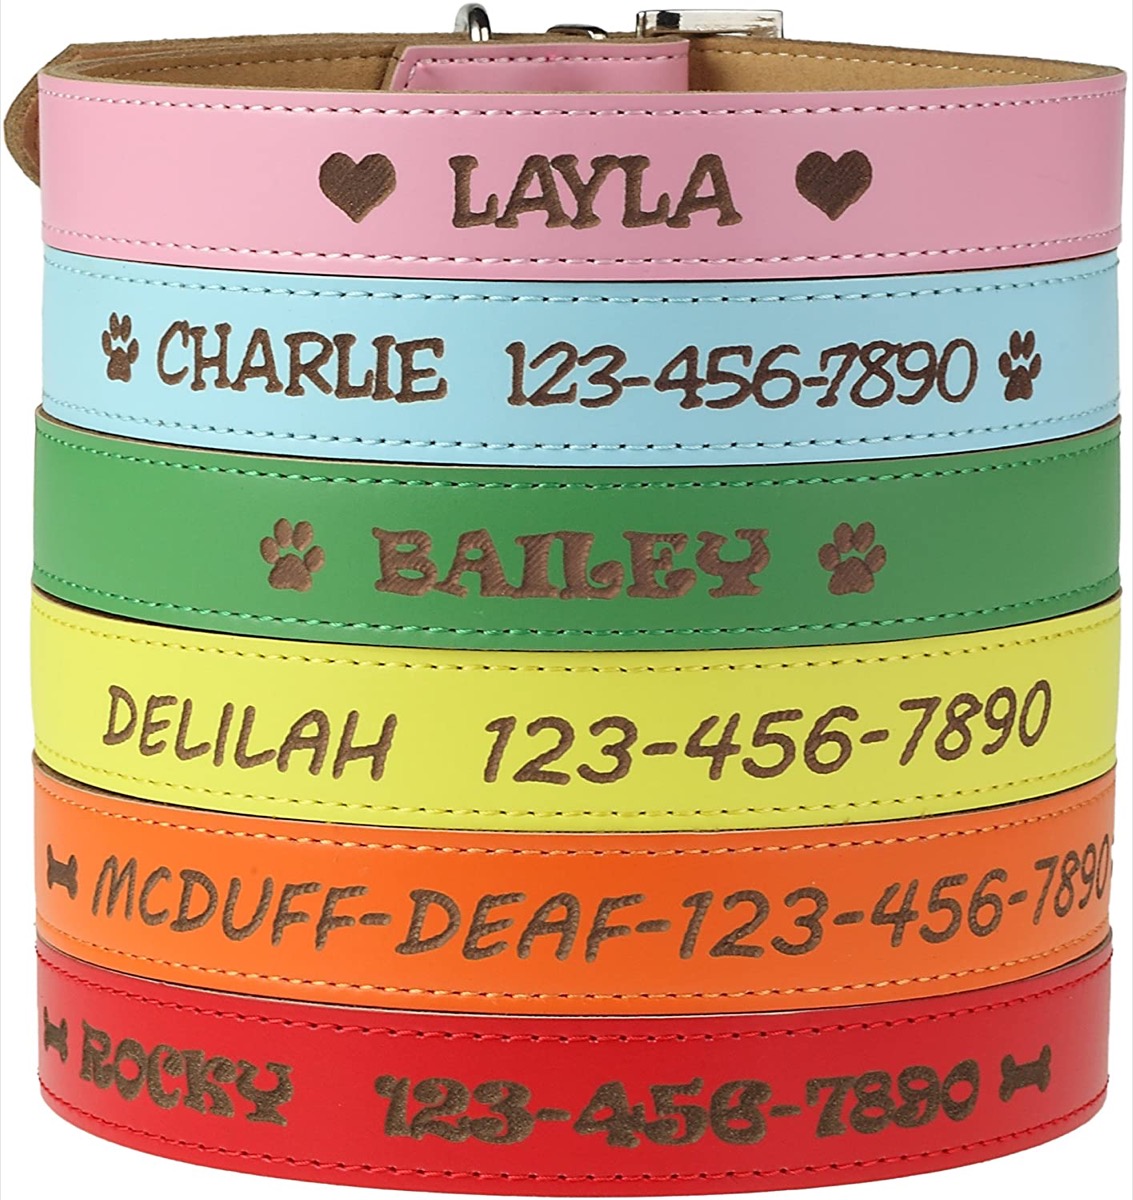 Engraved dog collars in many colors